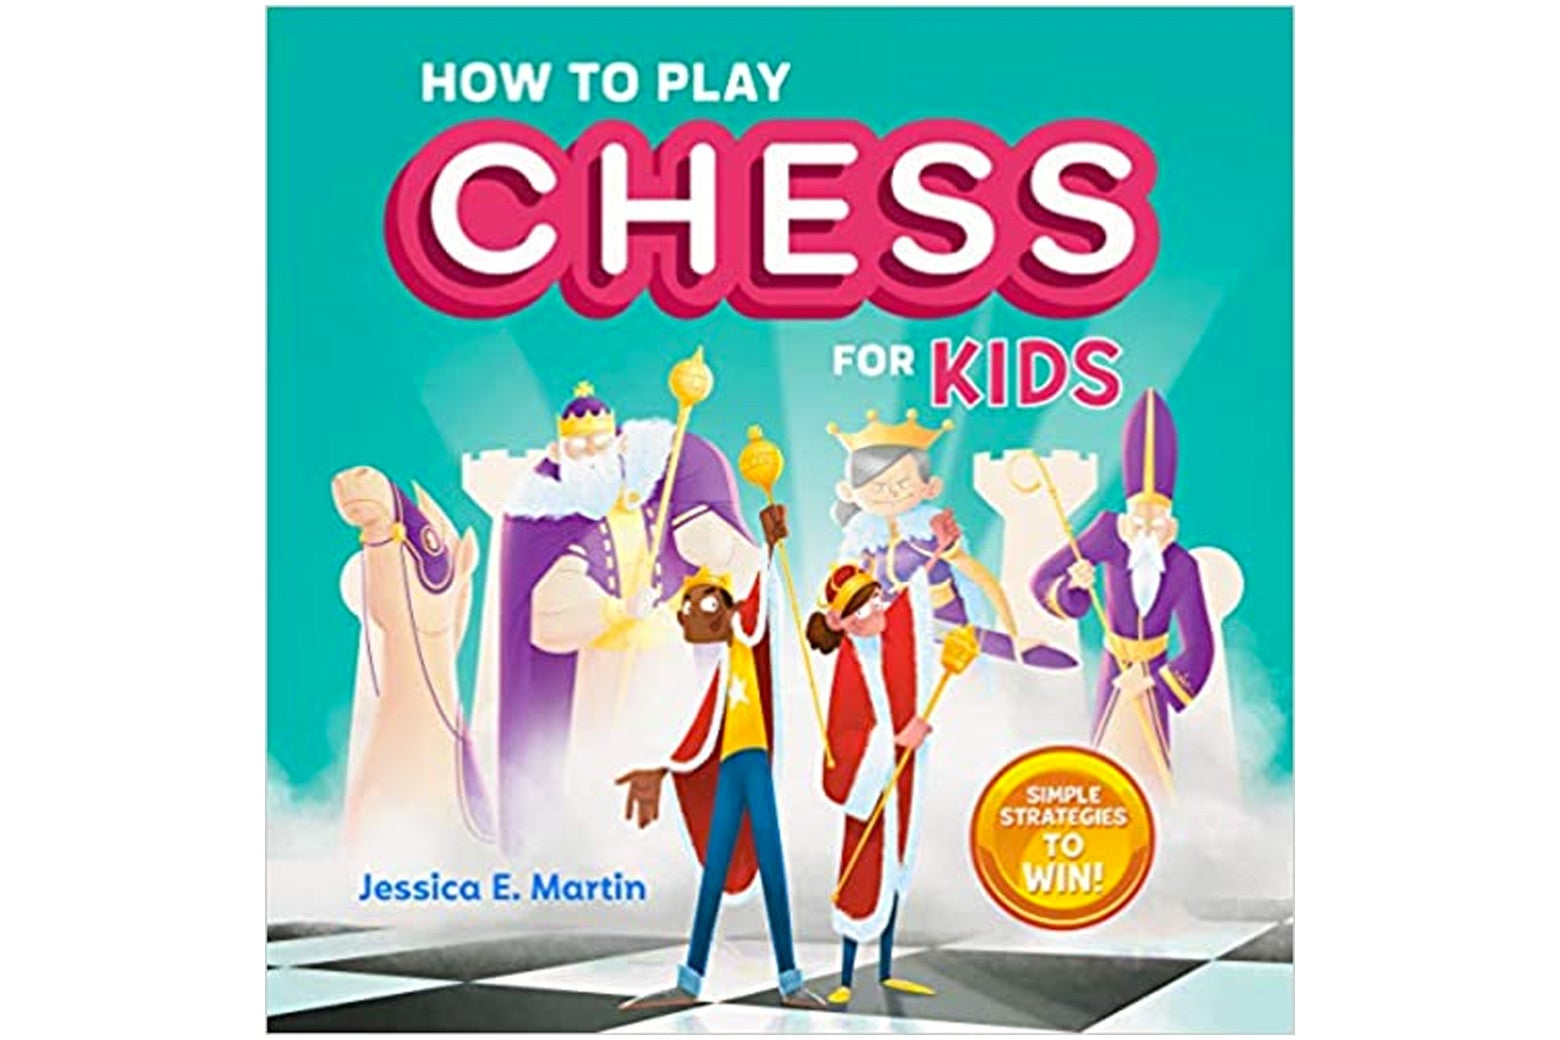 How to Play Chess for Kids book jacket